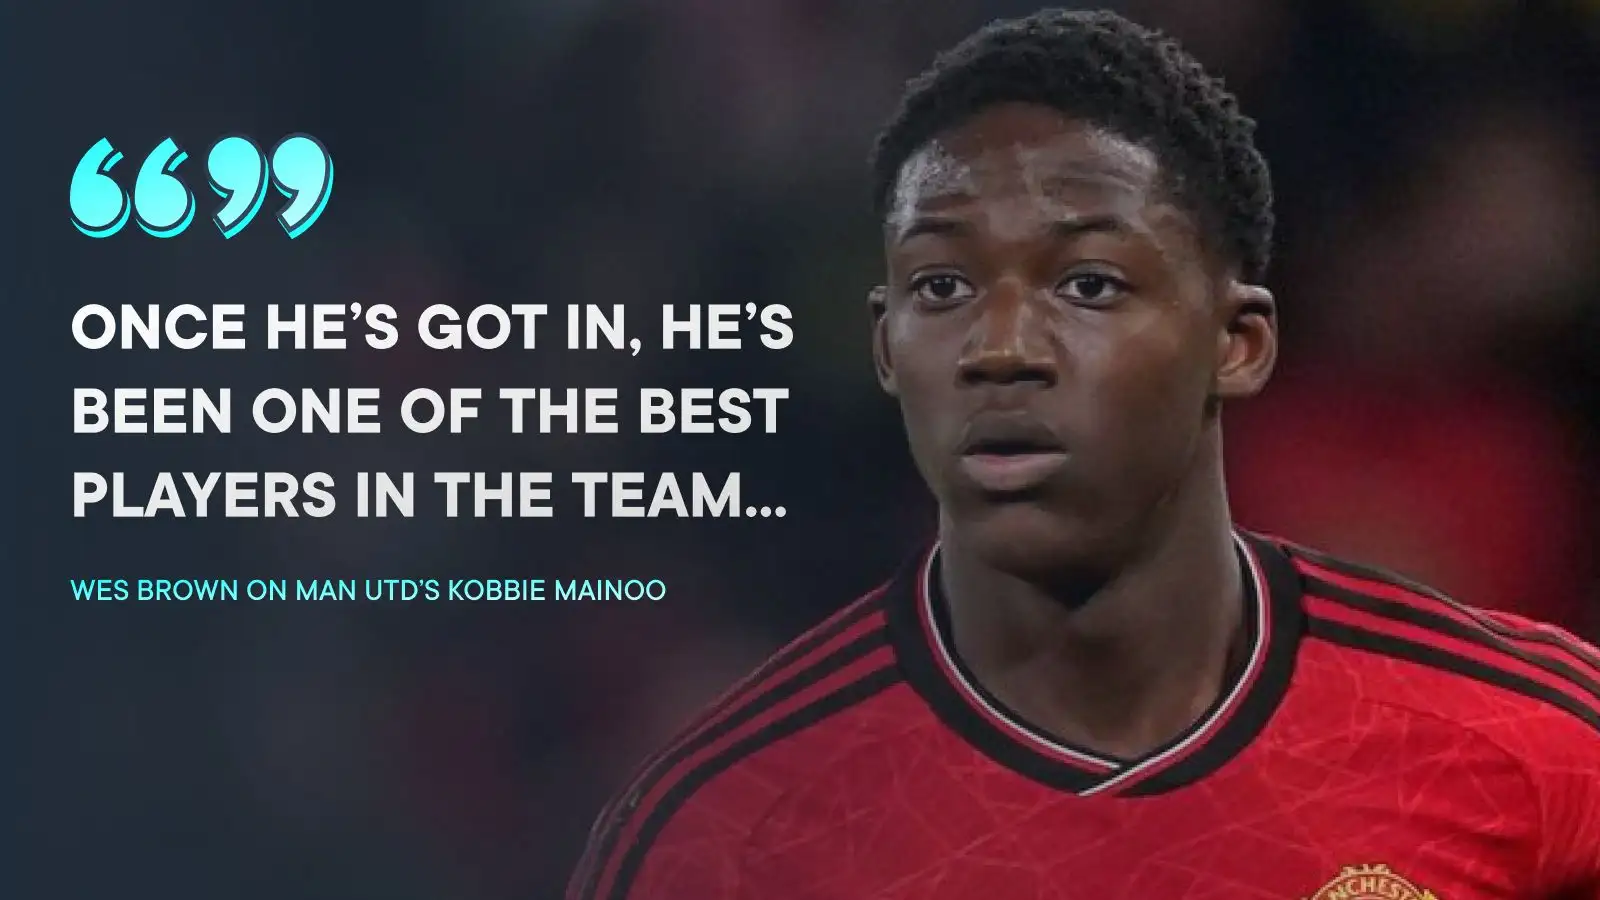 Male Utd and England boy Kobbie Mainoo is well prepped to prosper for England, says Wes Brown.